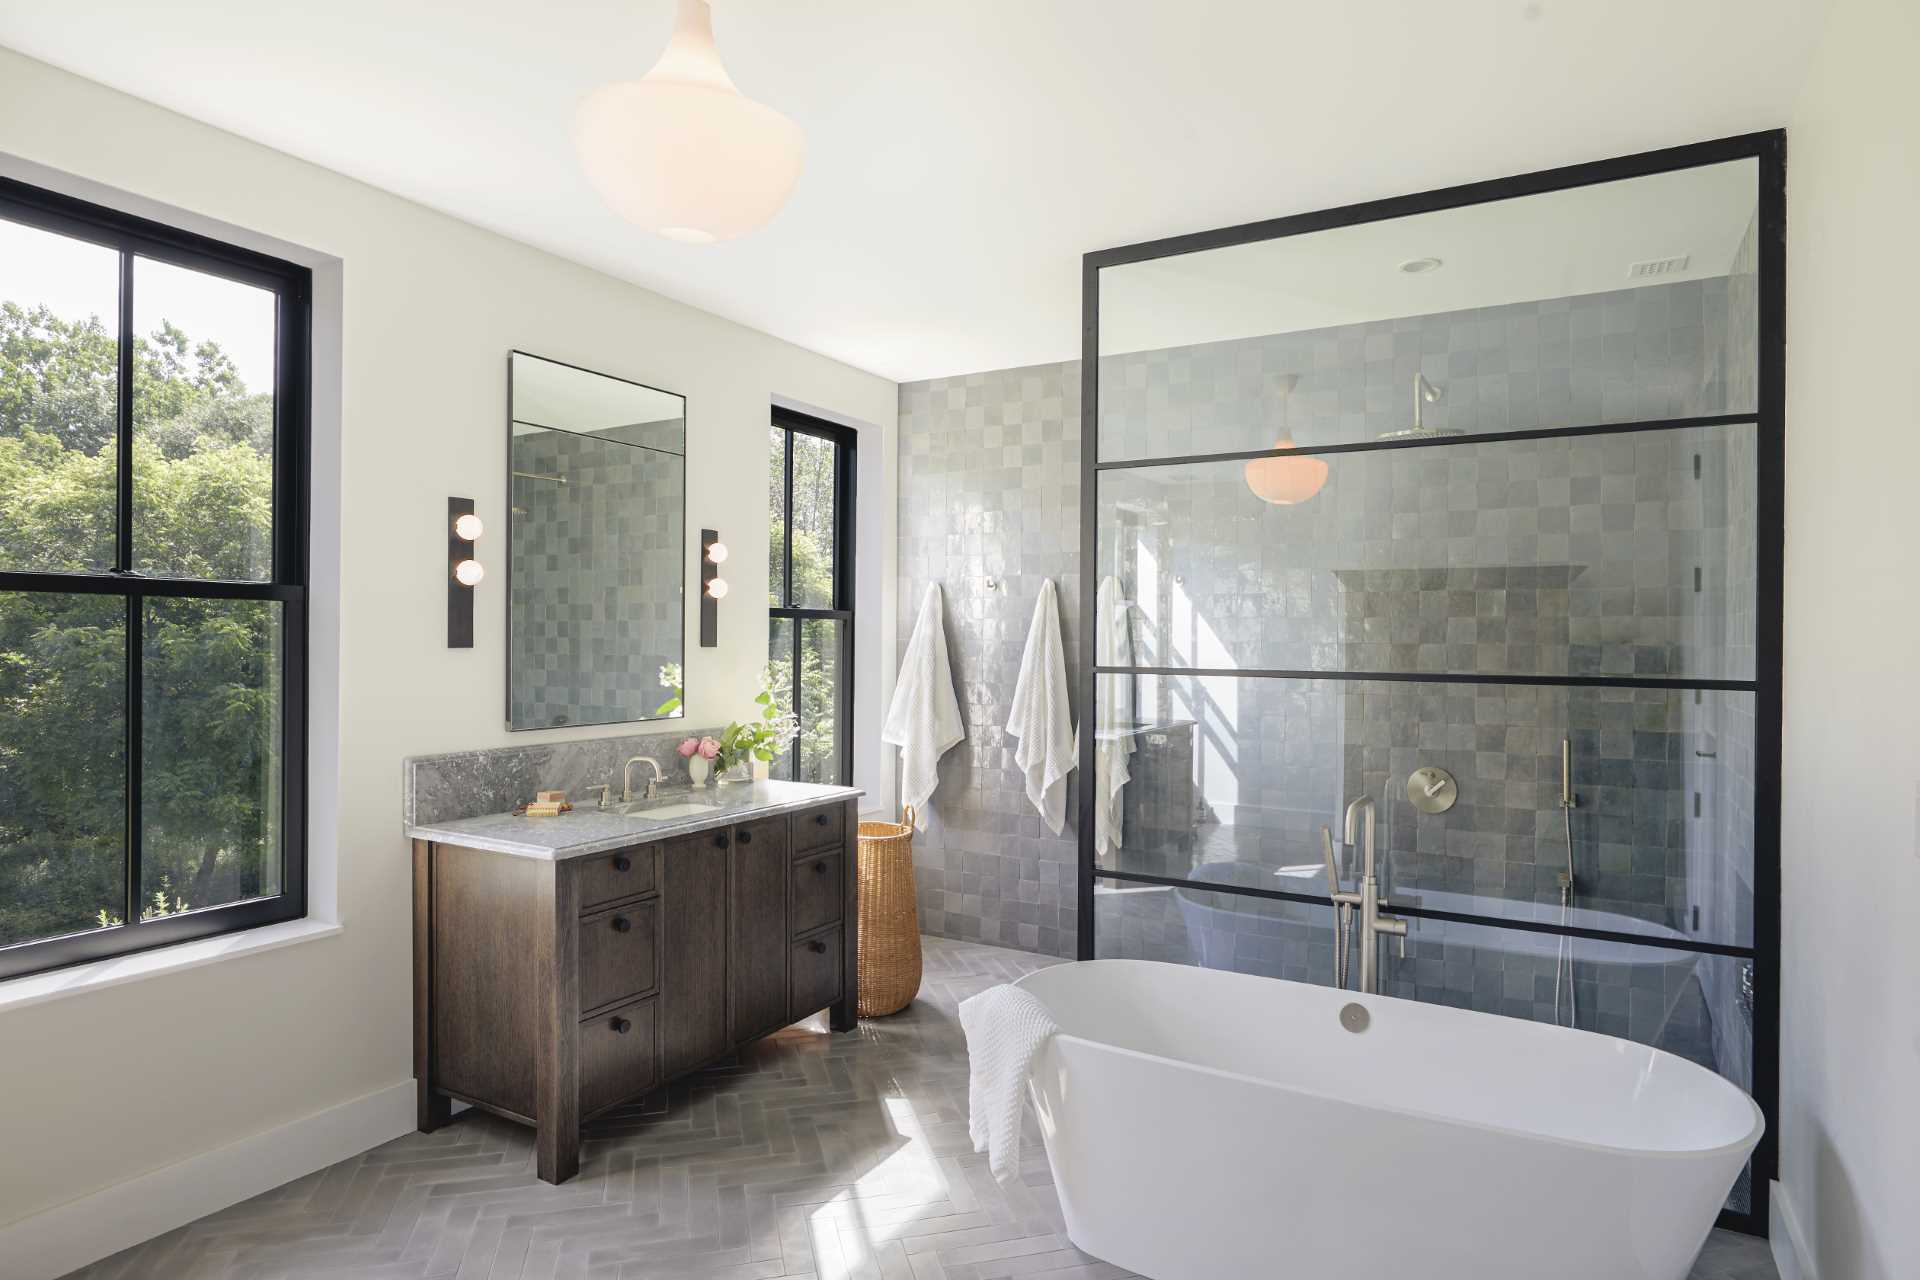 In this modern bathroom, there's square grey tiles covering the wall, and a black framed glass screen separates the freestanding bathtub from the shower.